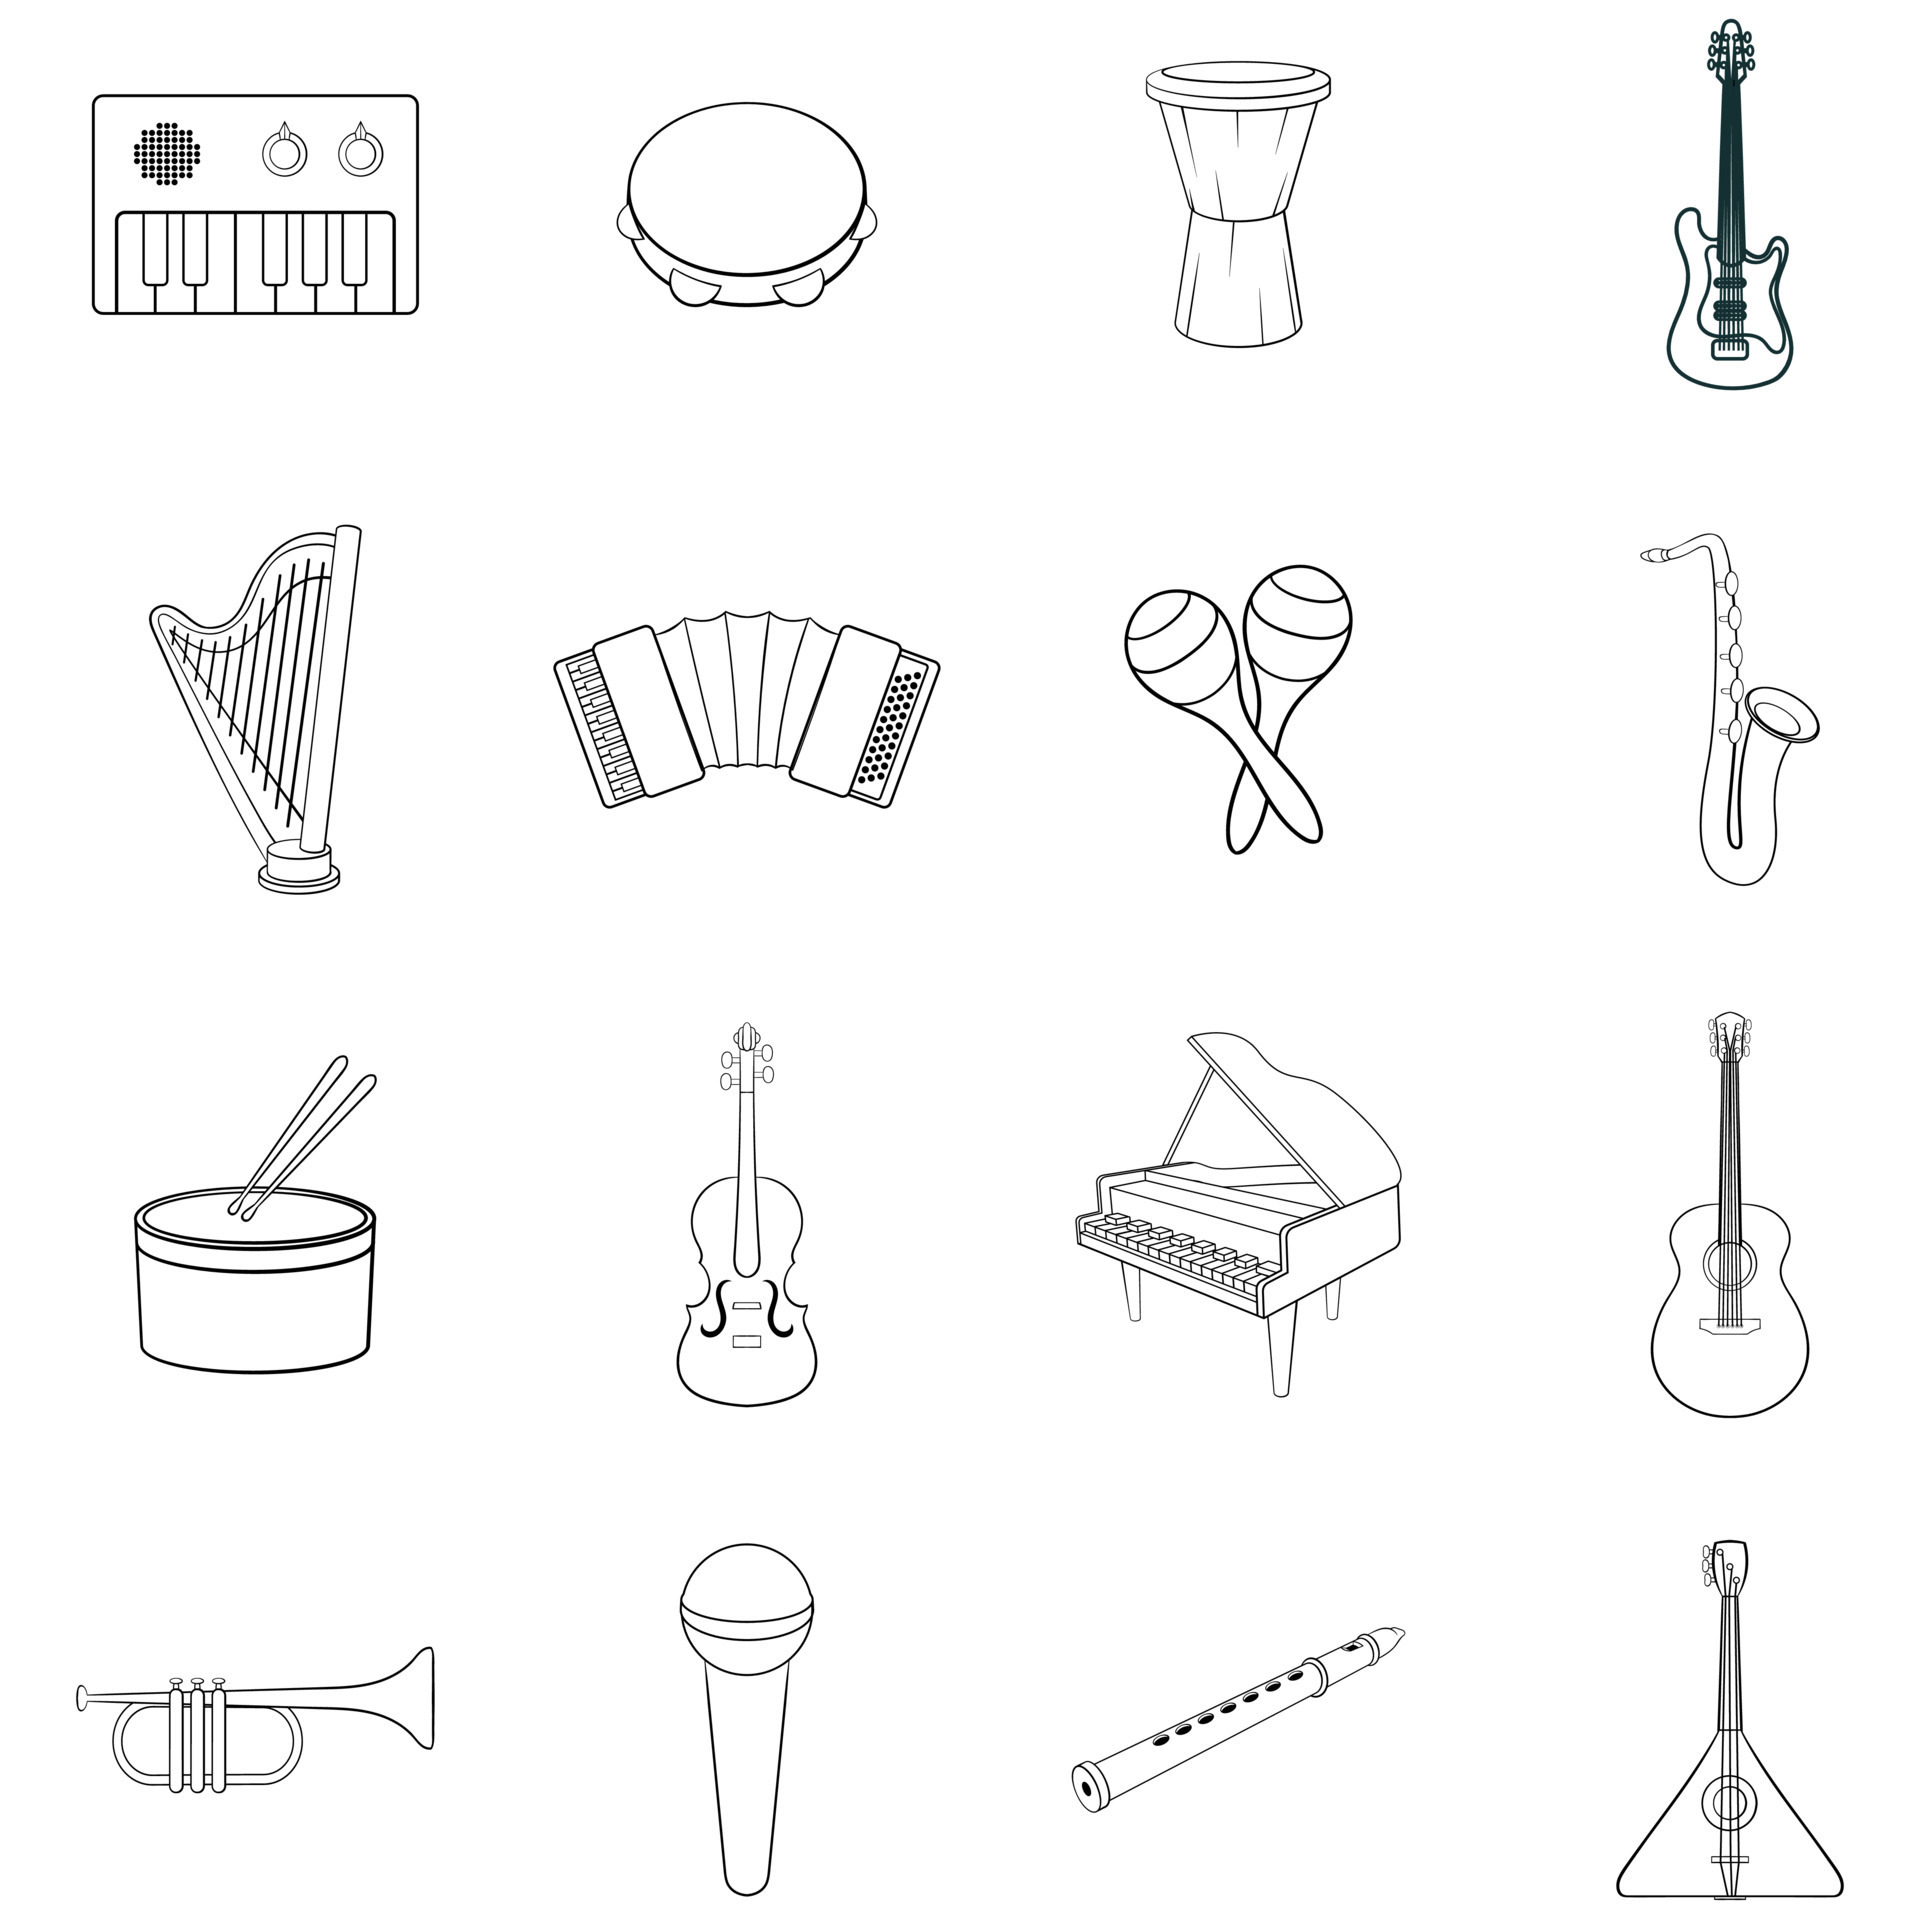 Musical instrument instruction diagrams: get to know your instrument -  Classic FM